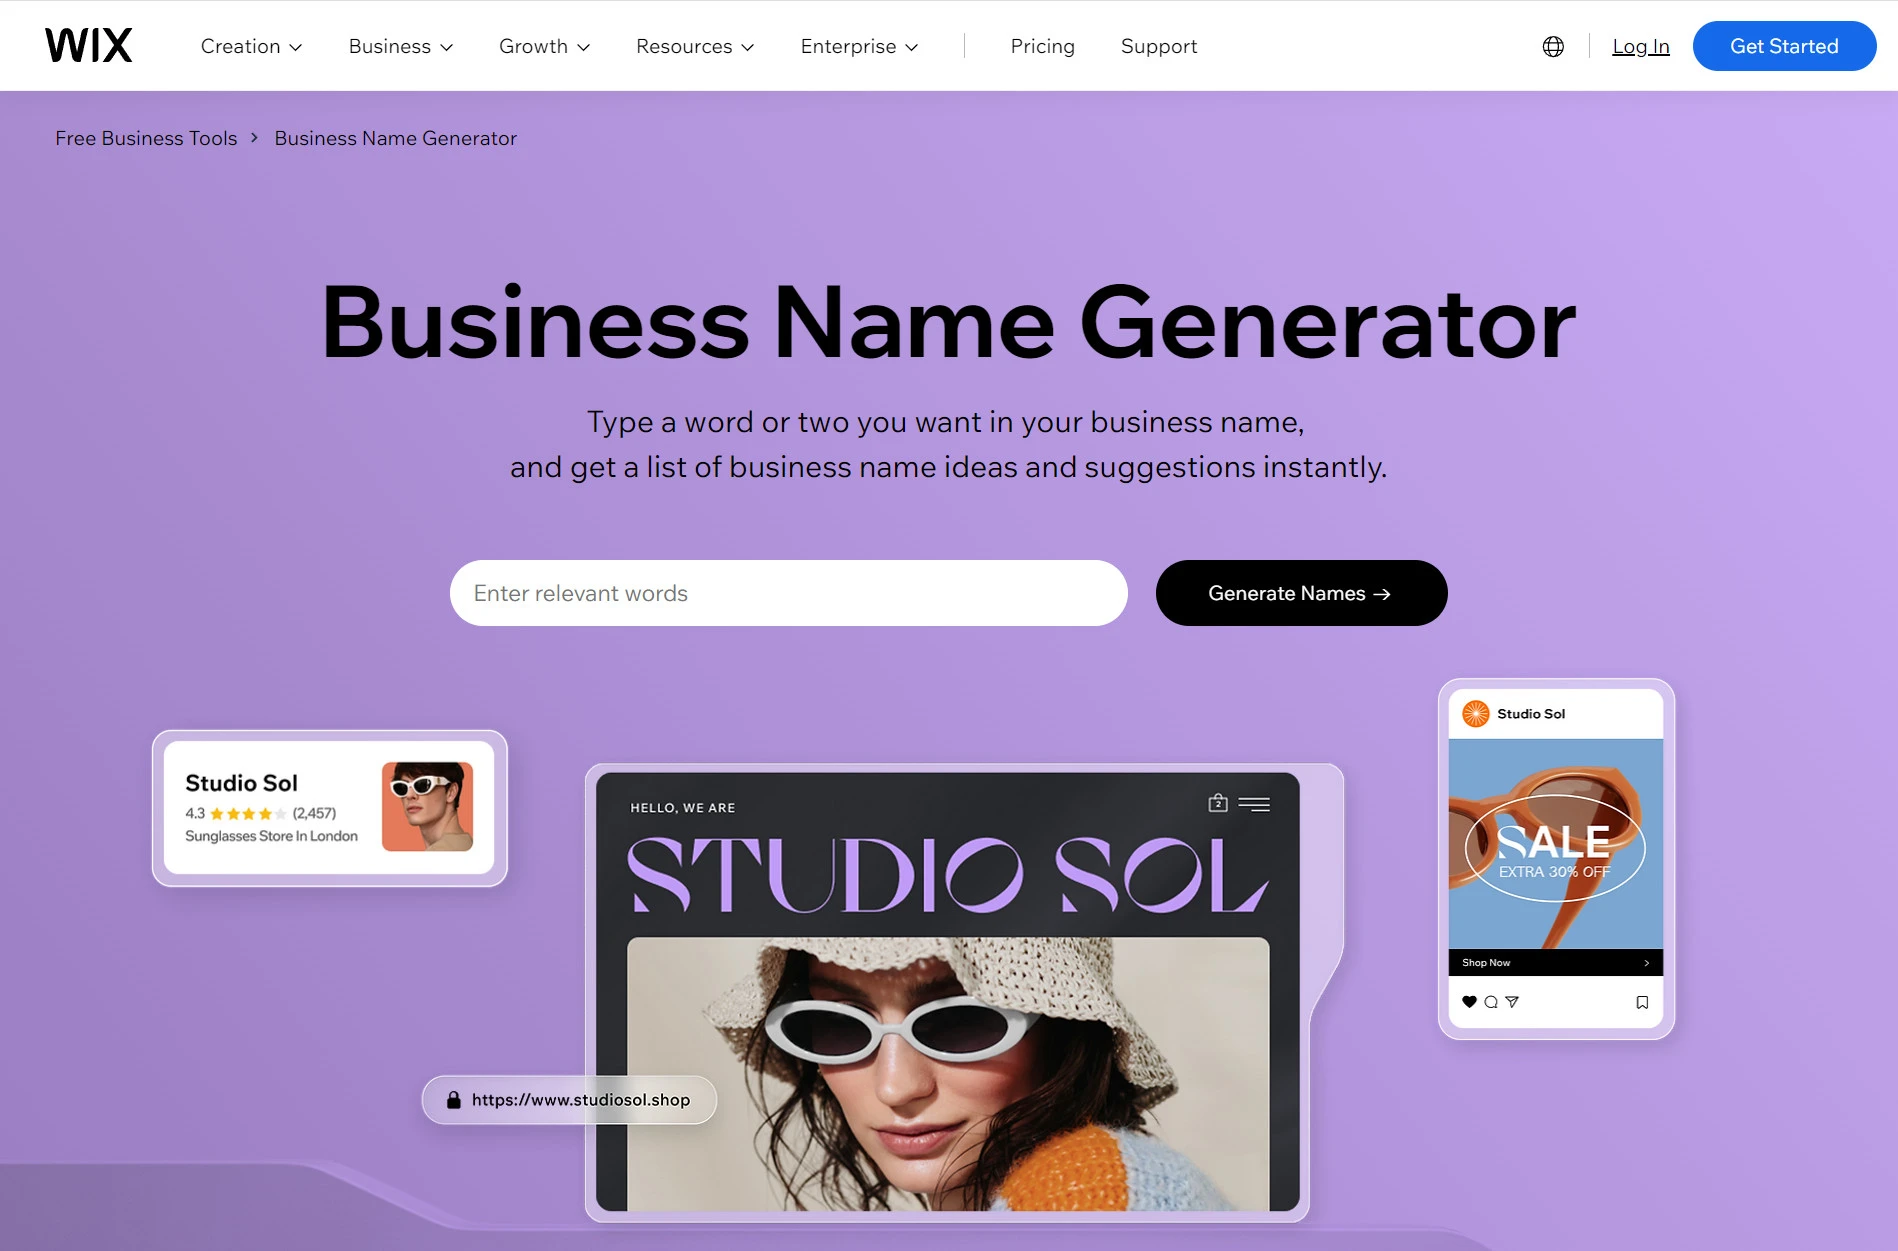 600+ Good Store Names by Niche for Customers' Attention